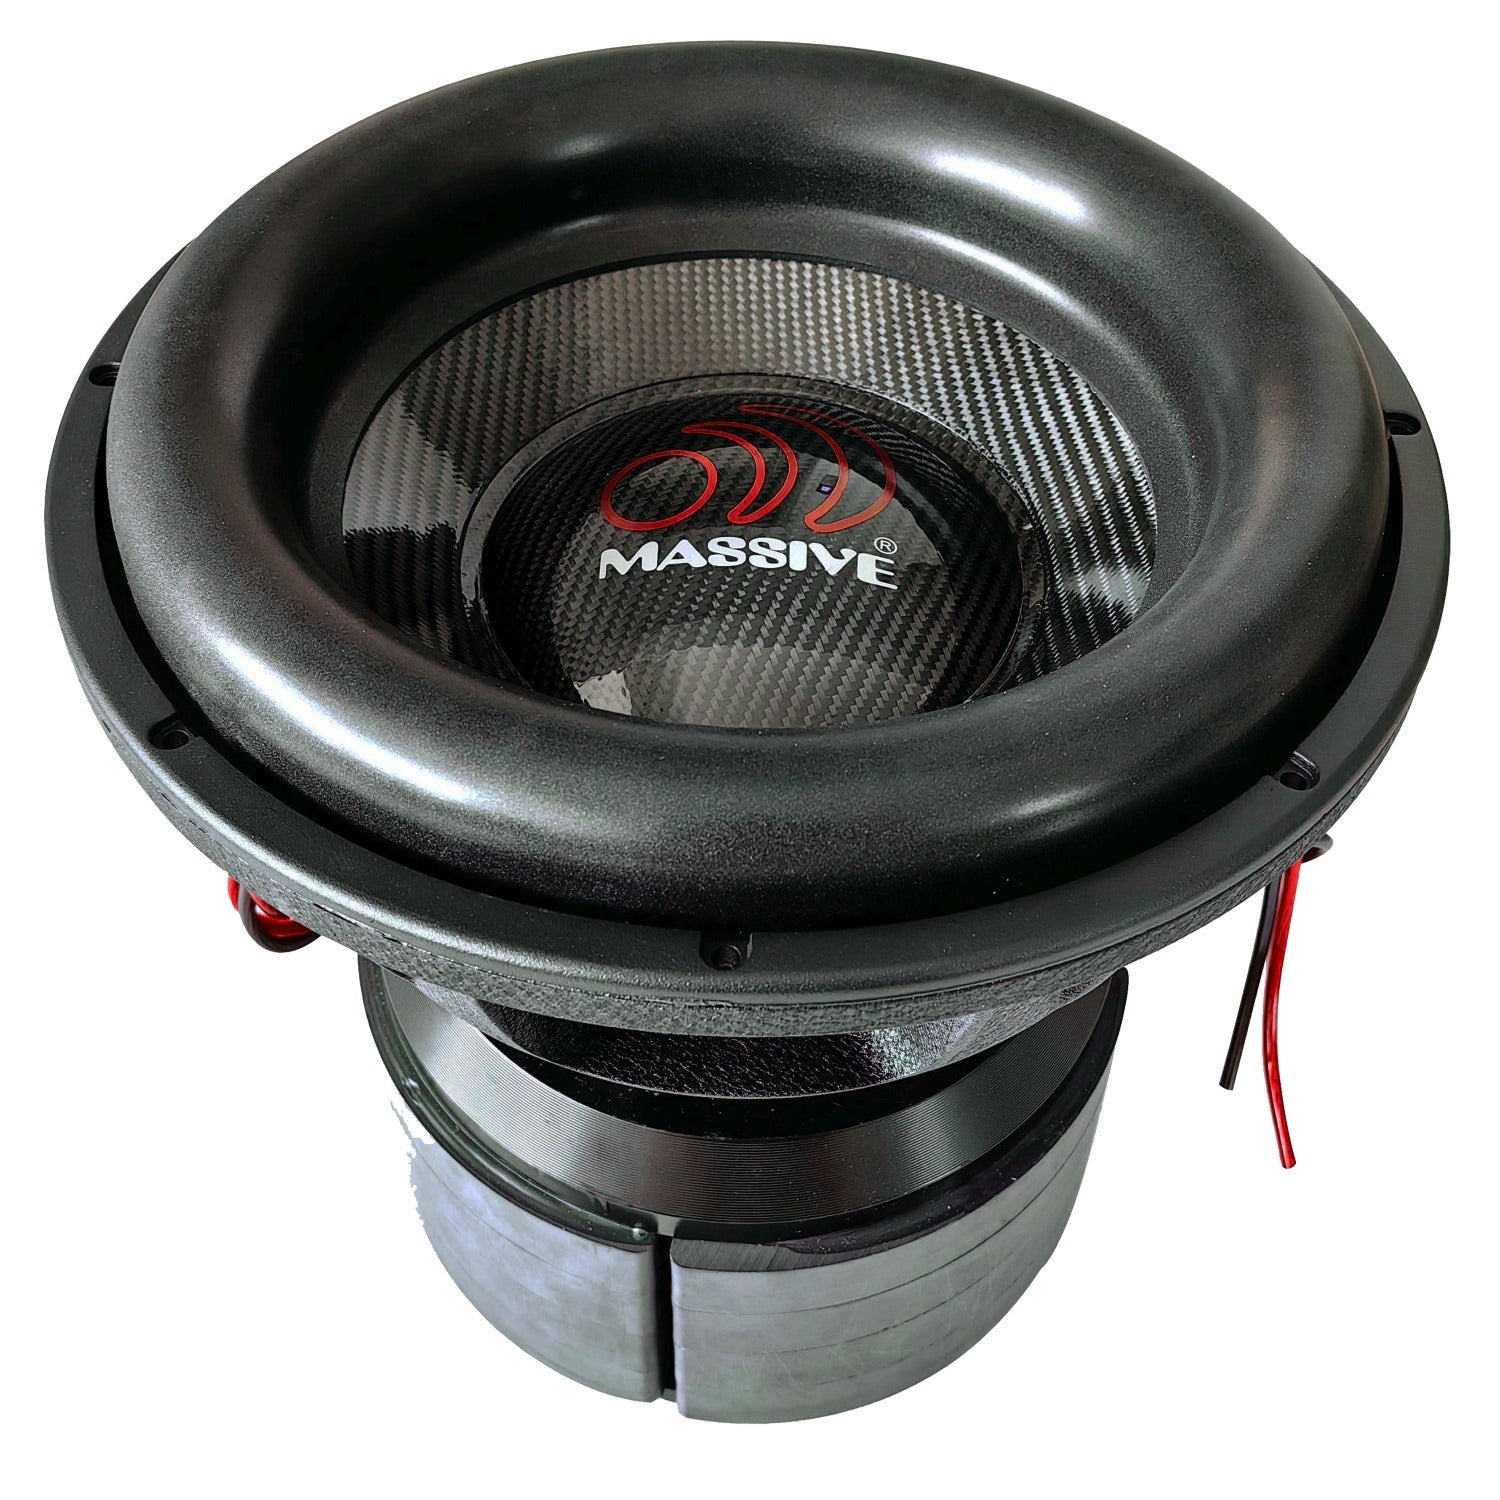 BOA152R - 15" 8,000 Watts RMS Dual 2 Ohm Mega Subwoofer - Caution* Product is 132 Lbs. and Requires Special Handling